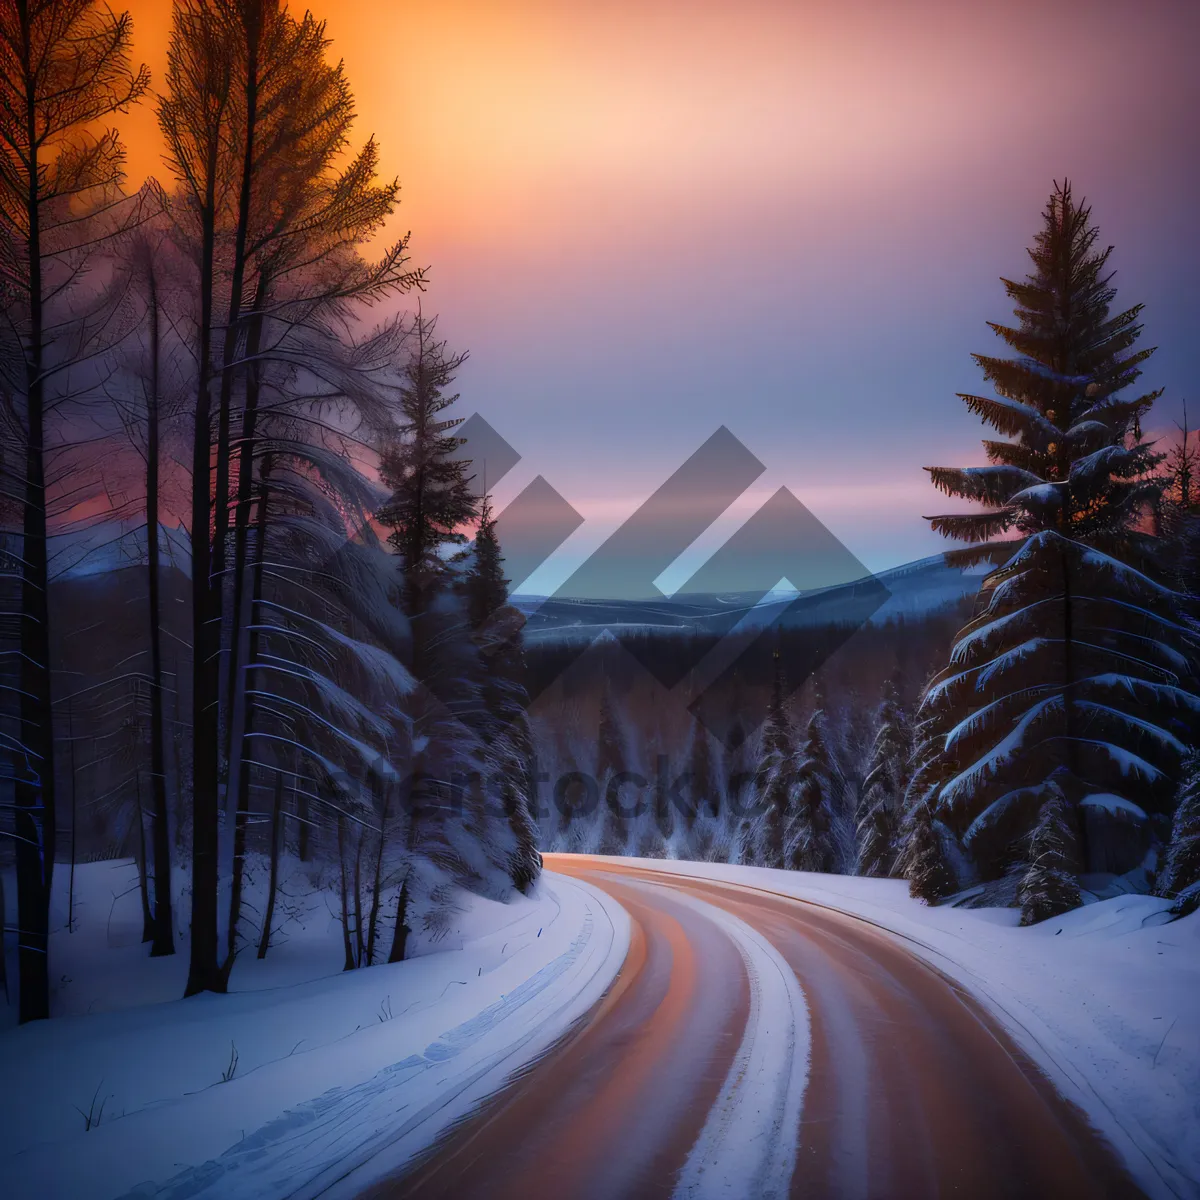 Picture of Majestic Snowy Mountain Landscape transformed into a Winter Wonderland